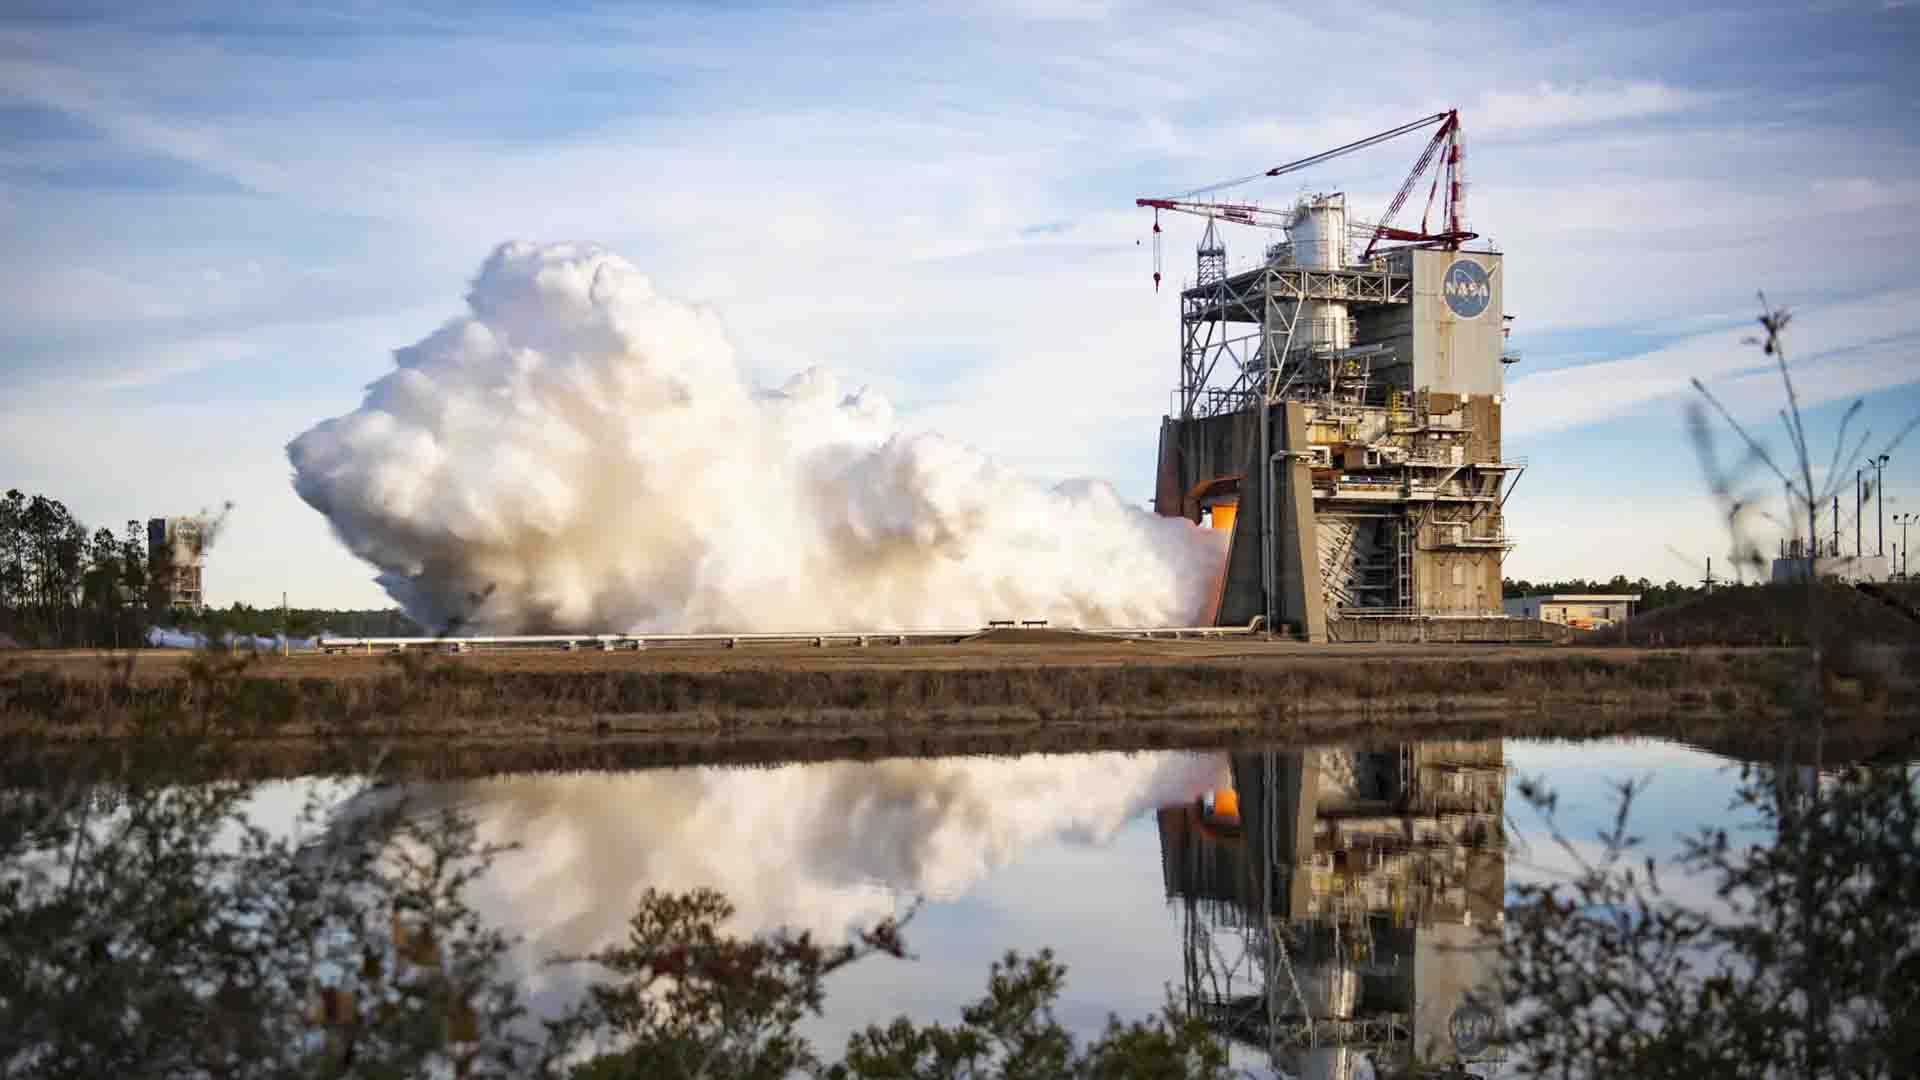 NASA full-duration 500 second hot fire test of RS-25 engine 